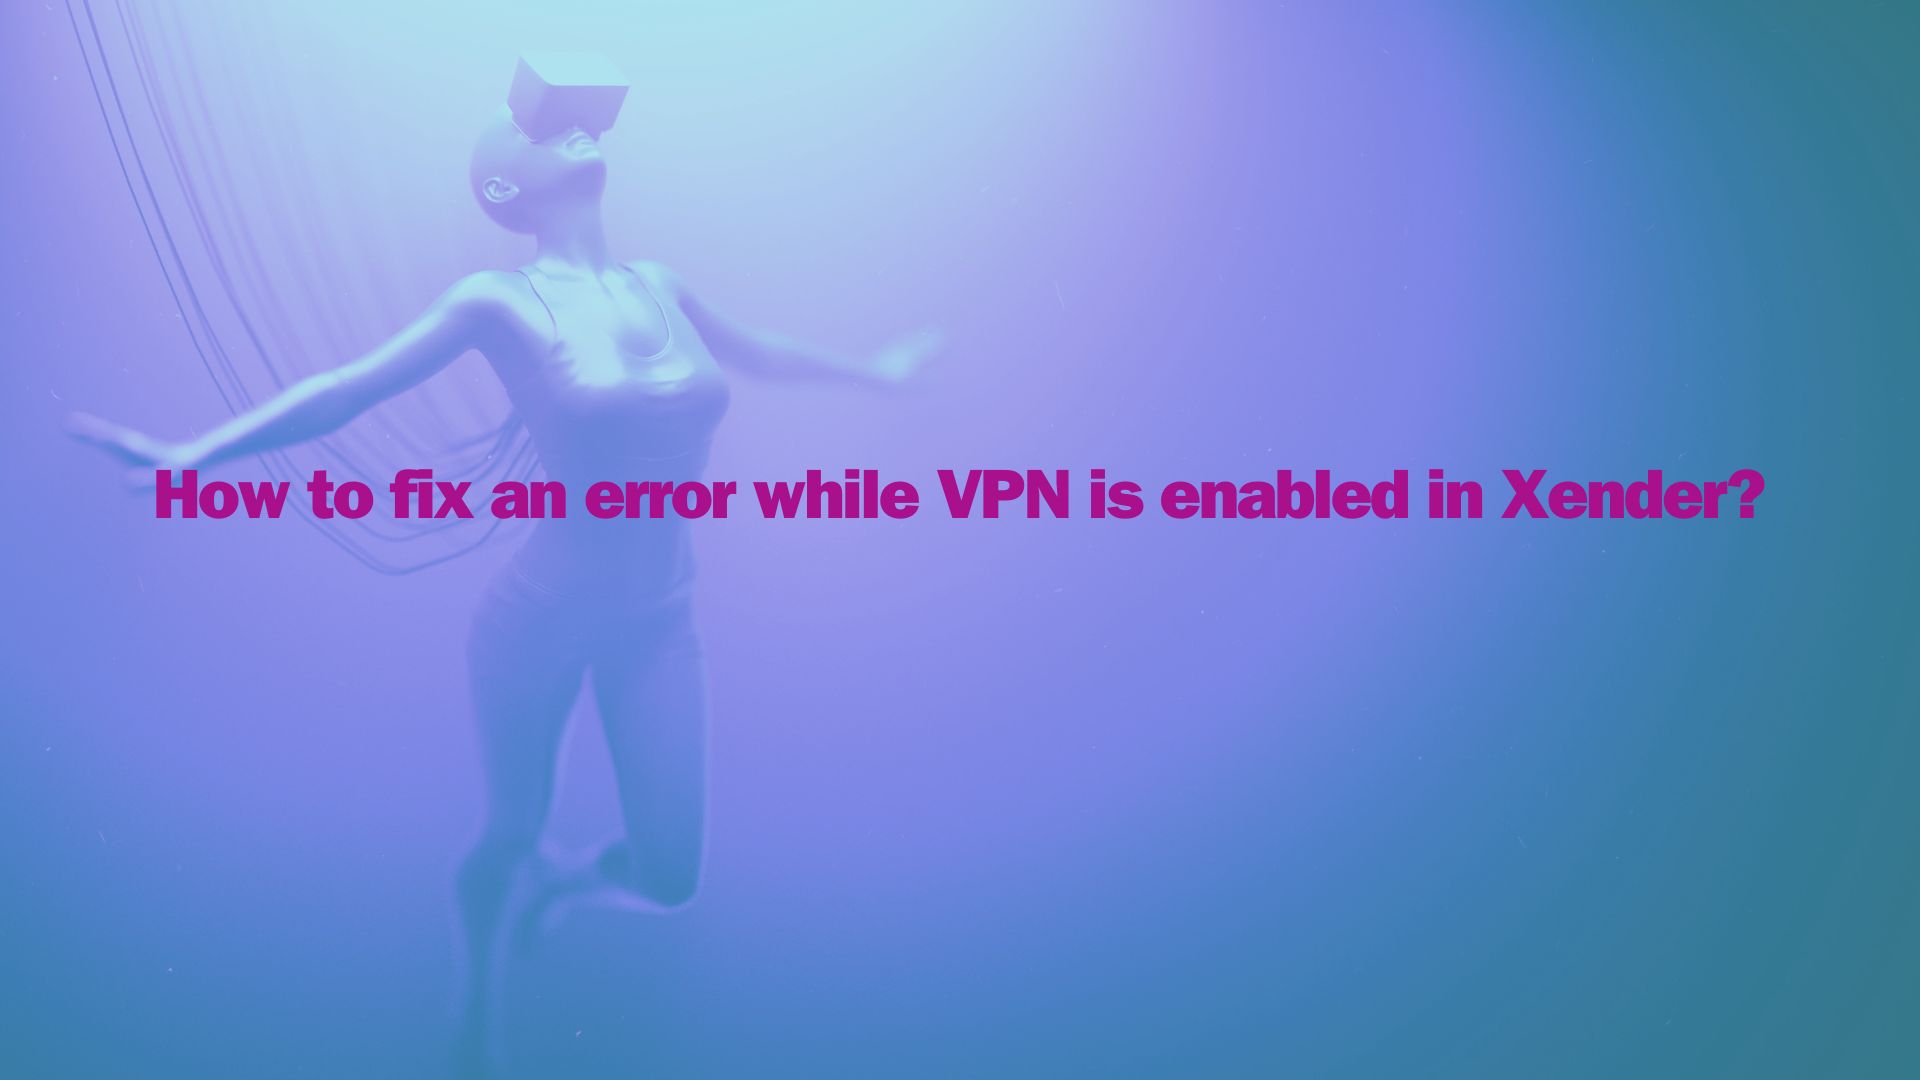 How to fix an error while VPN is enabled in Xender?